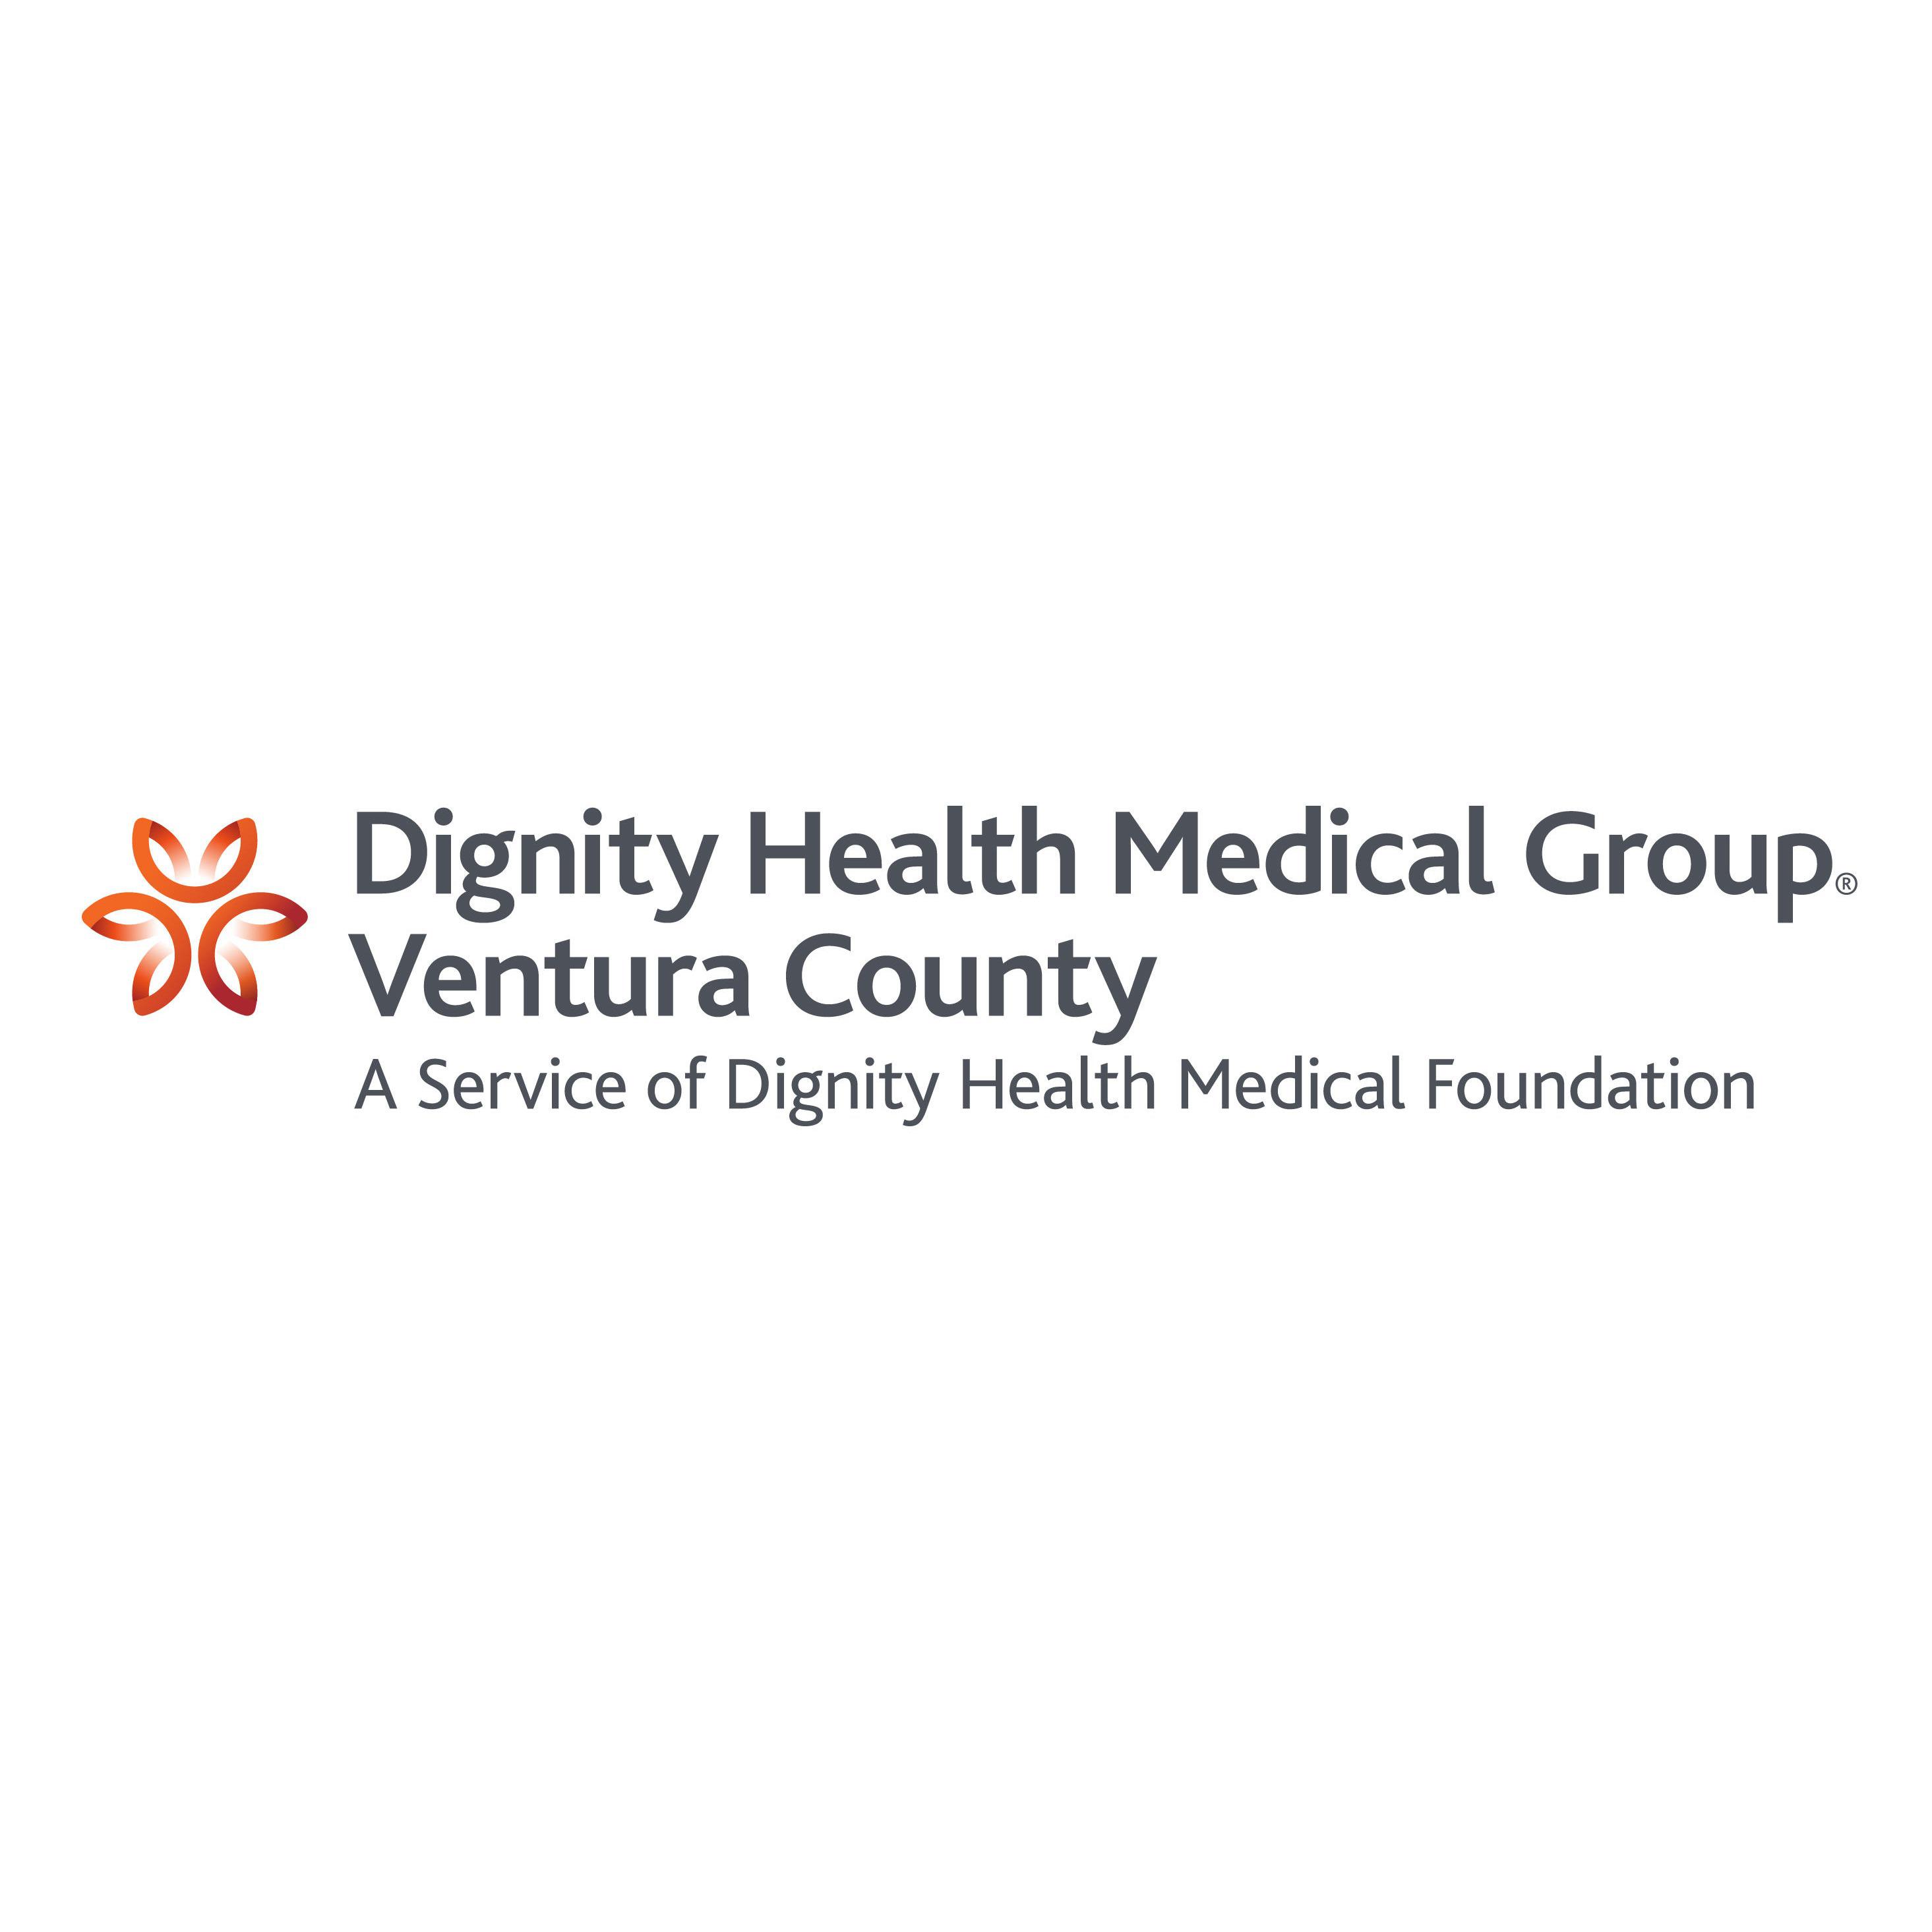 Dignity Health Medical Group - Ventura County (family and internal medicine)